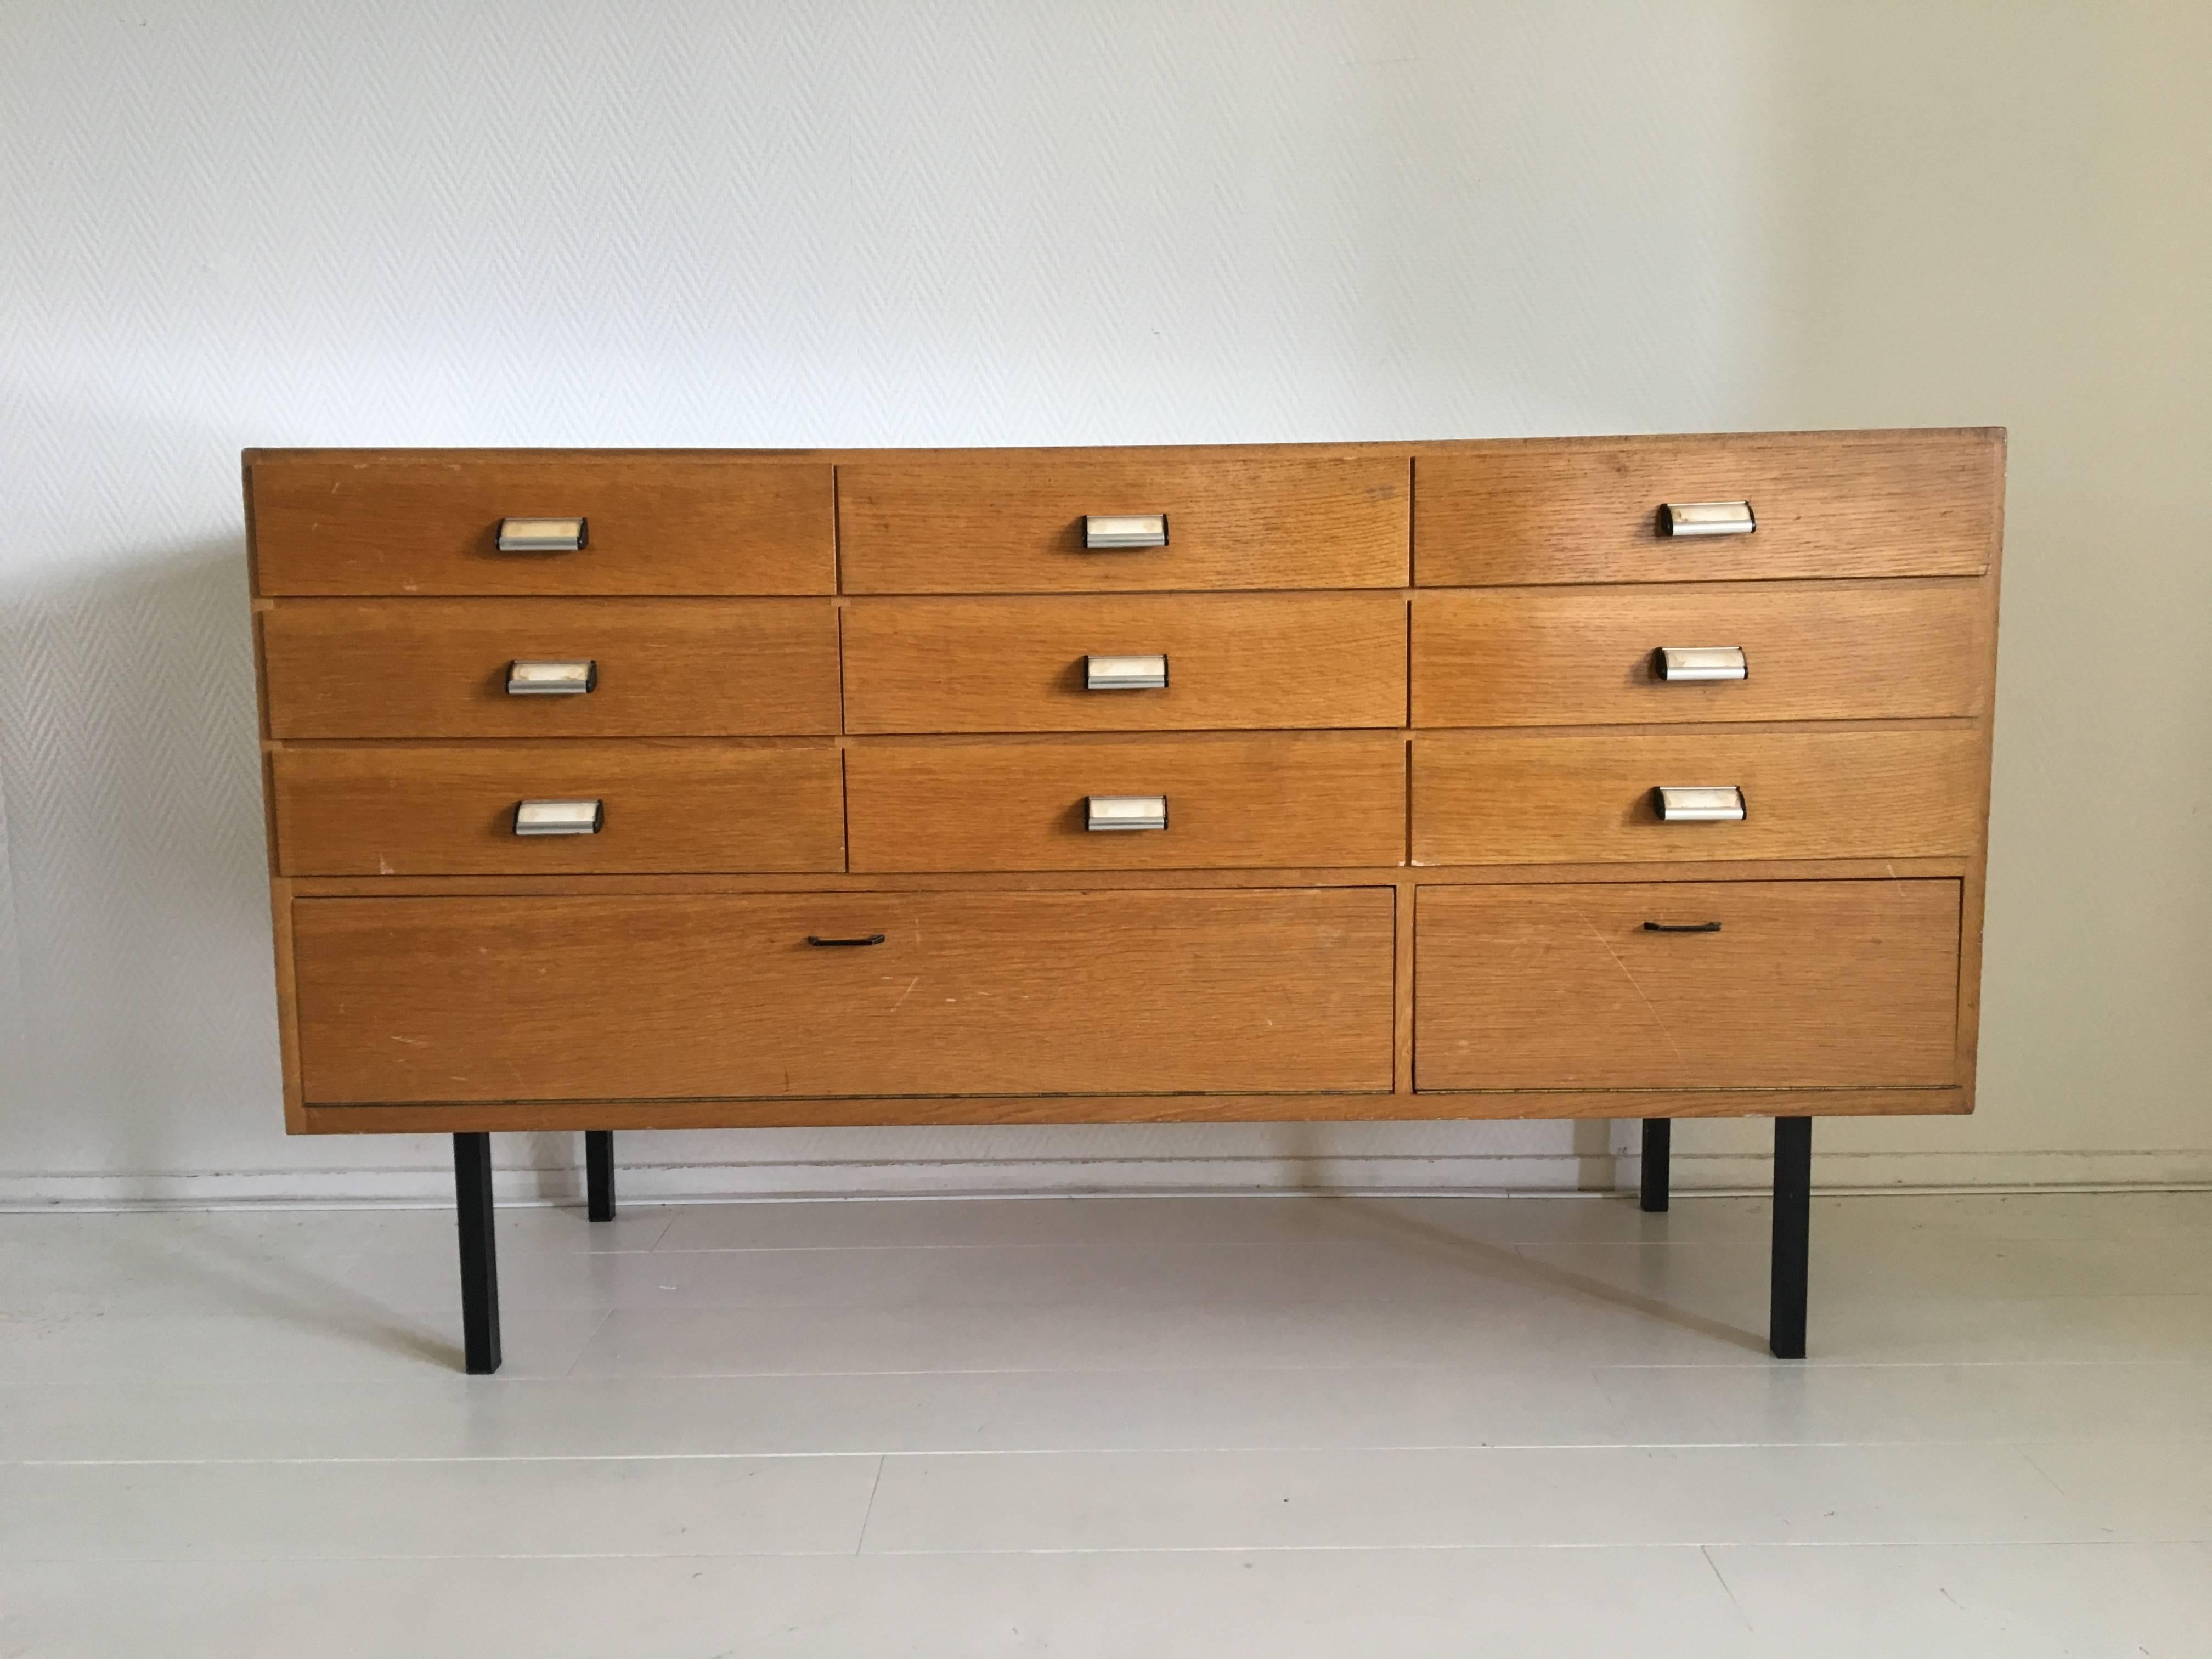 This Industrial looking piece was designed and manufactured in Europe, circa 1950s. It features an oak and thick glass body with black metal feet. It's nine drawers feature very nicely looking handles. Underneath the drawers there are two drop down